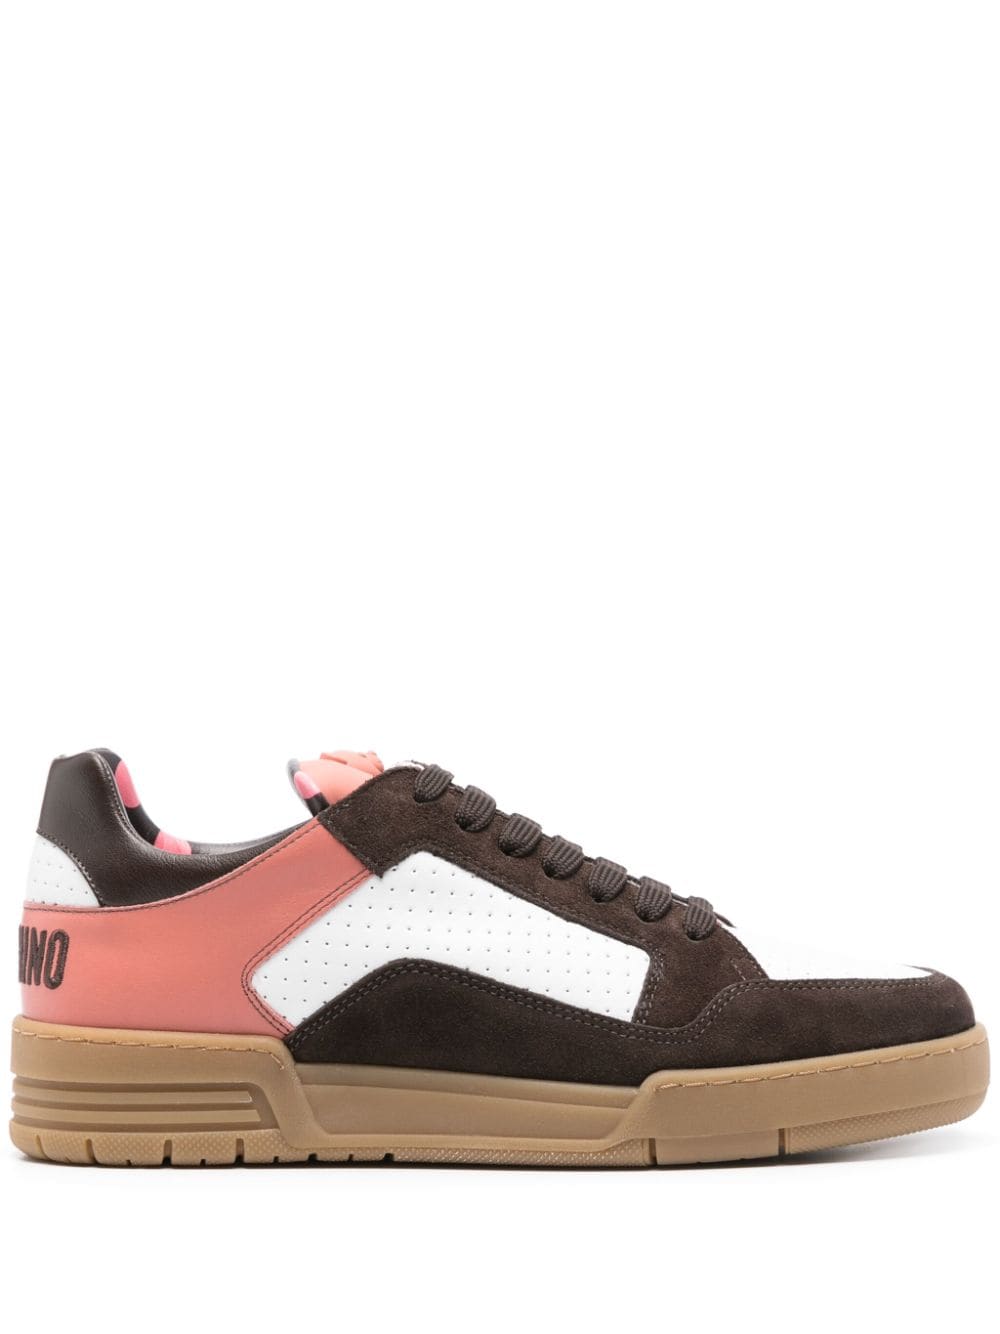 Moschino Panelled Leather Sneakers In Multi